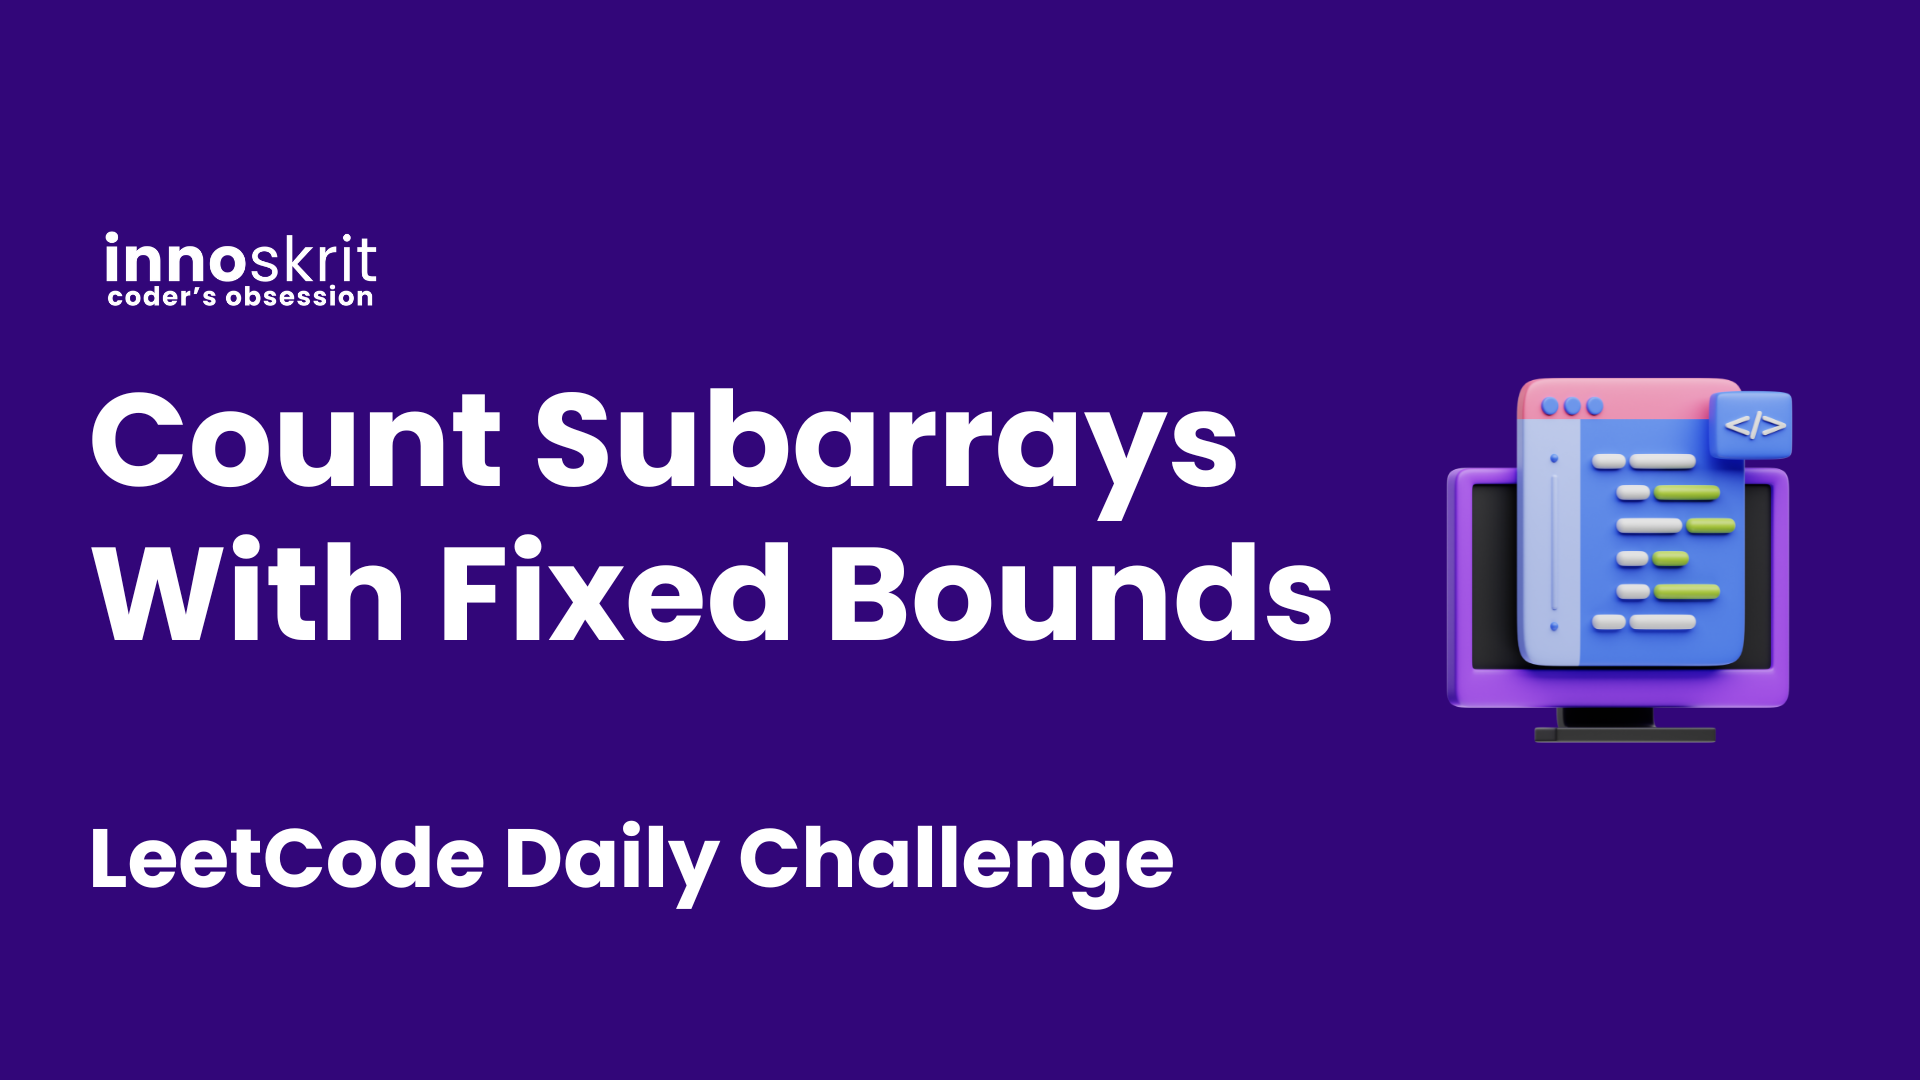 Count Subarrays With Fixed Bounds - LeetCode Daily Challenge